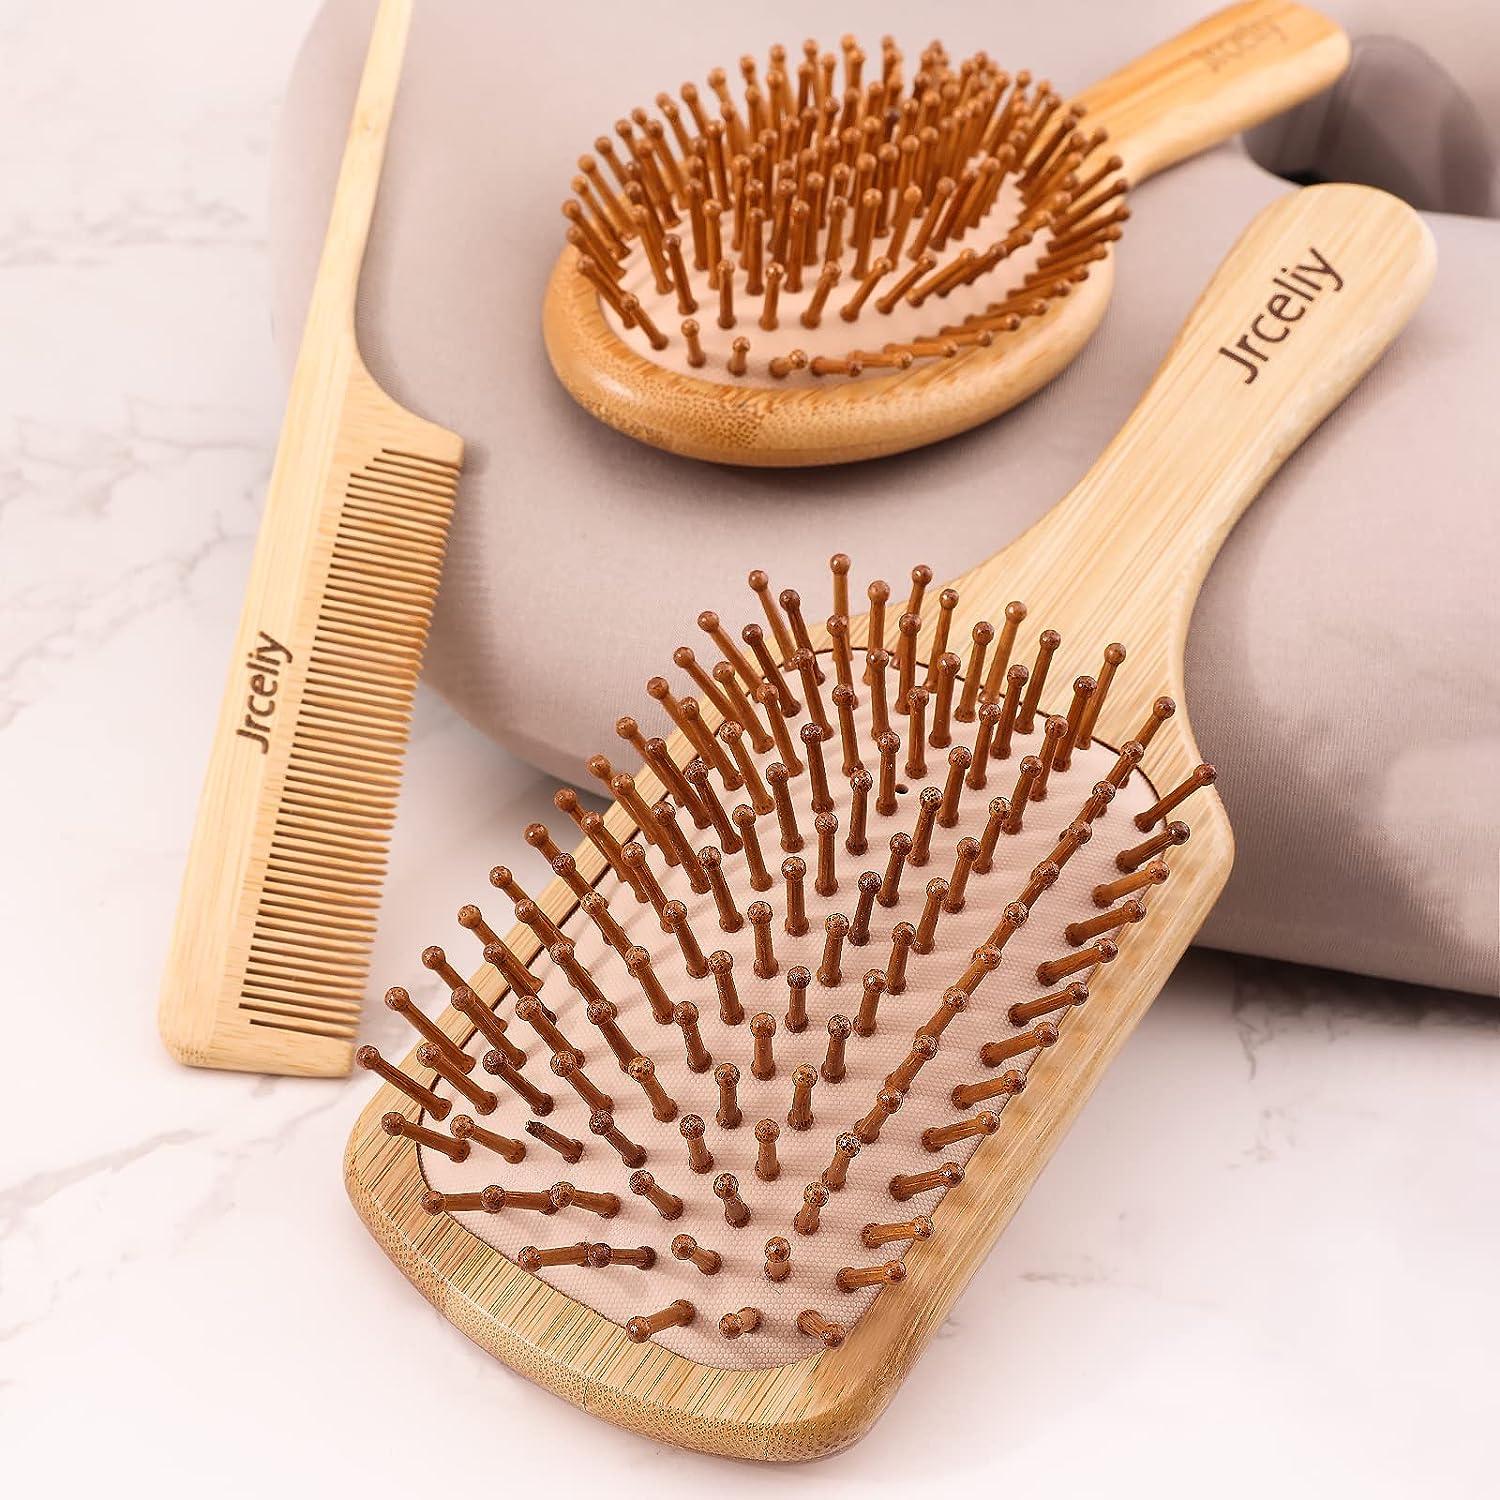 Masthome 3PCS Natural Bamboo Brushes Set for Household